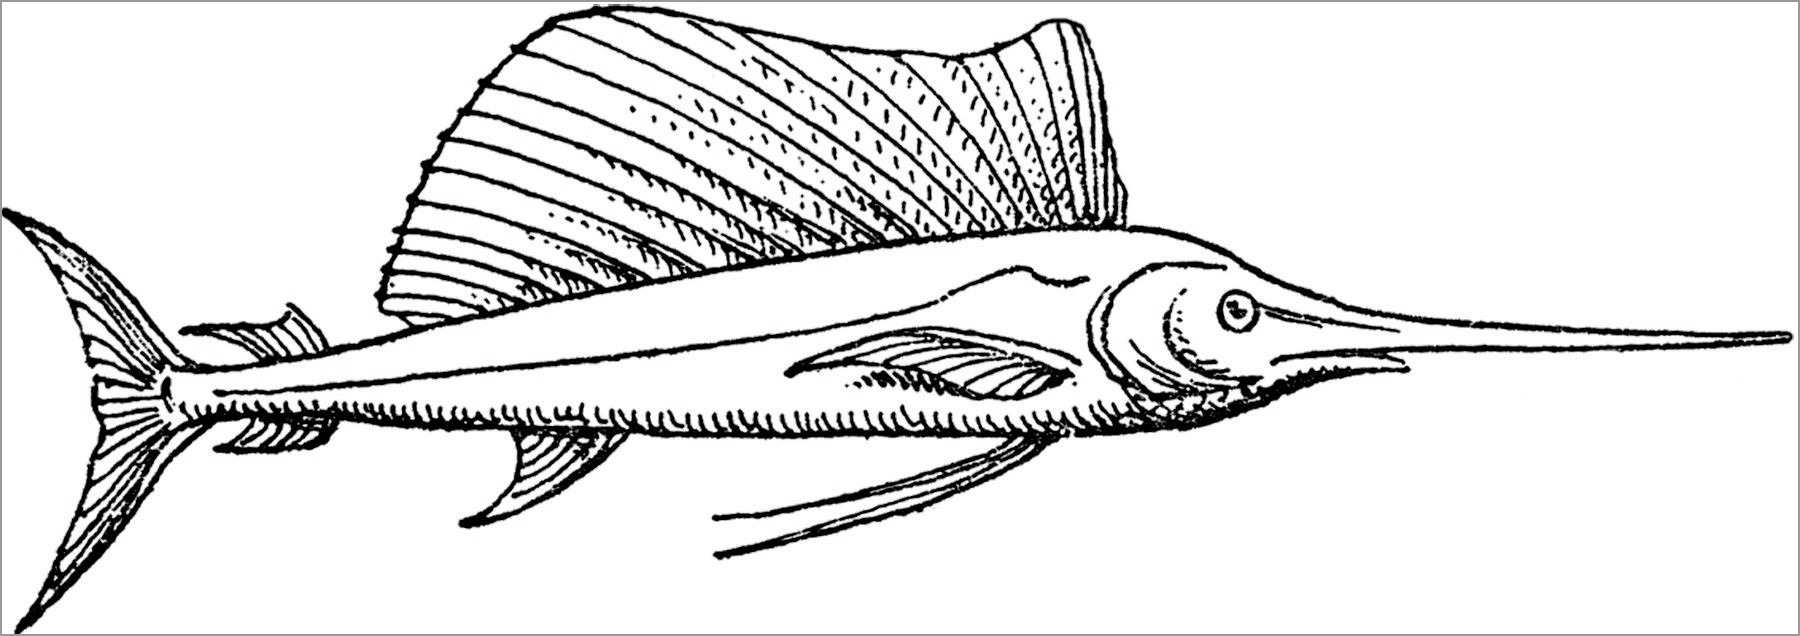 Swordfish Coloring Page to Print